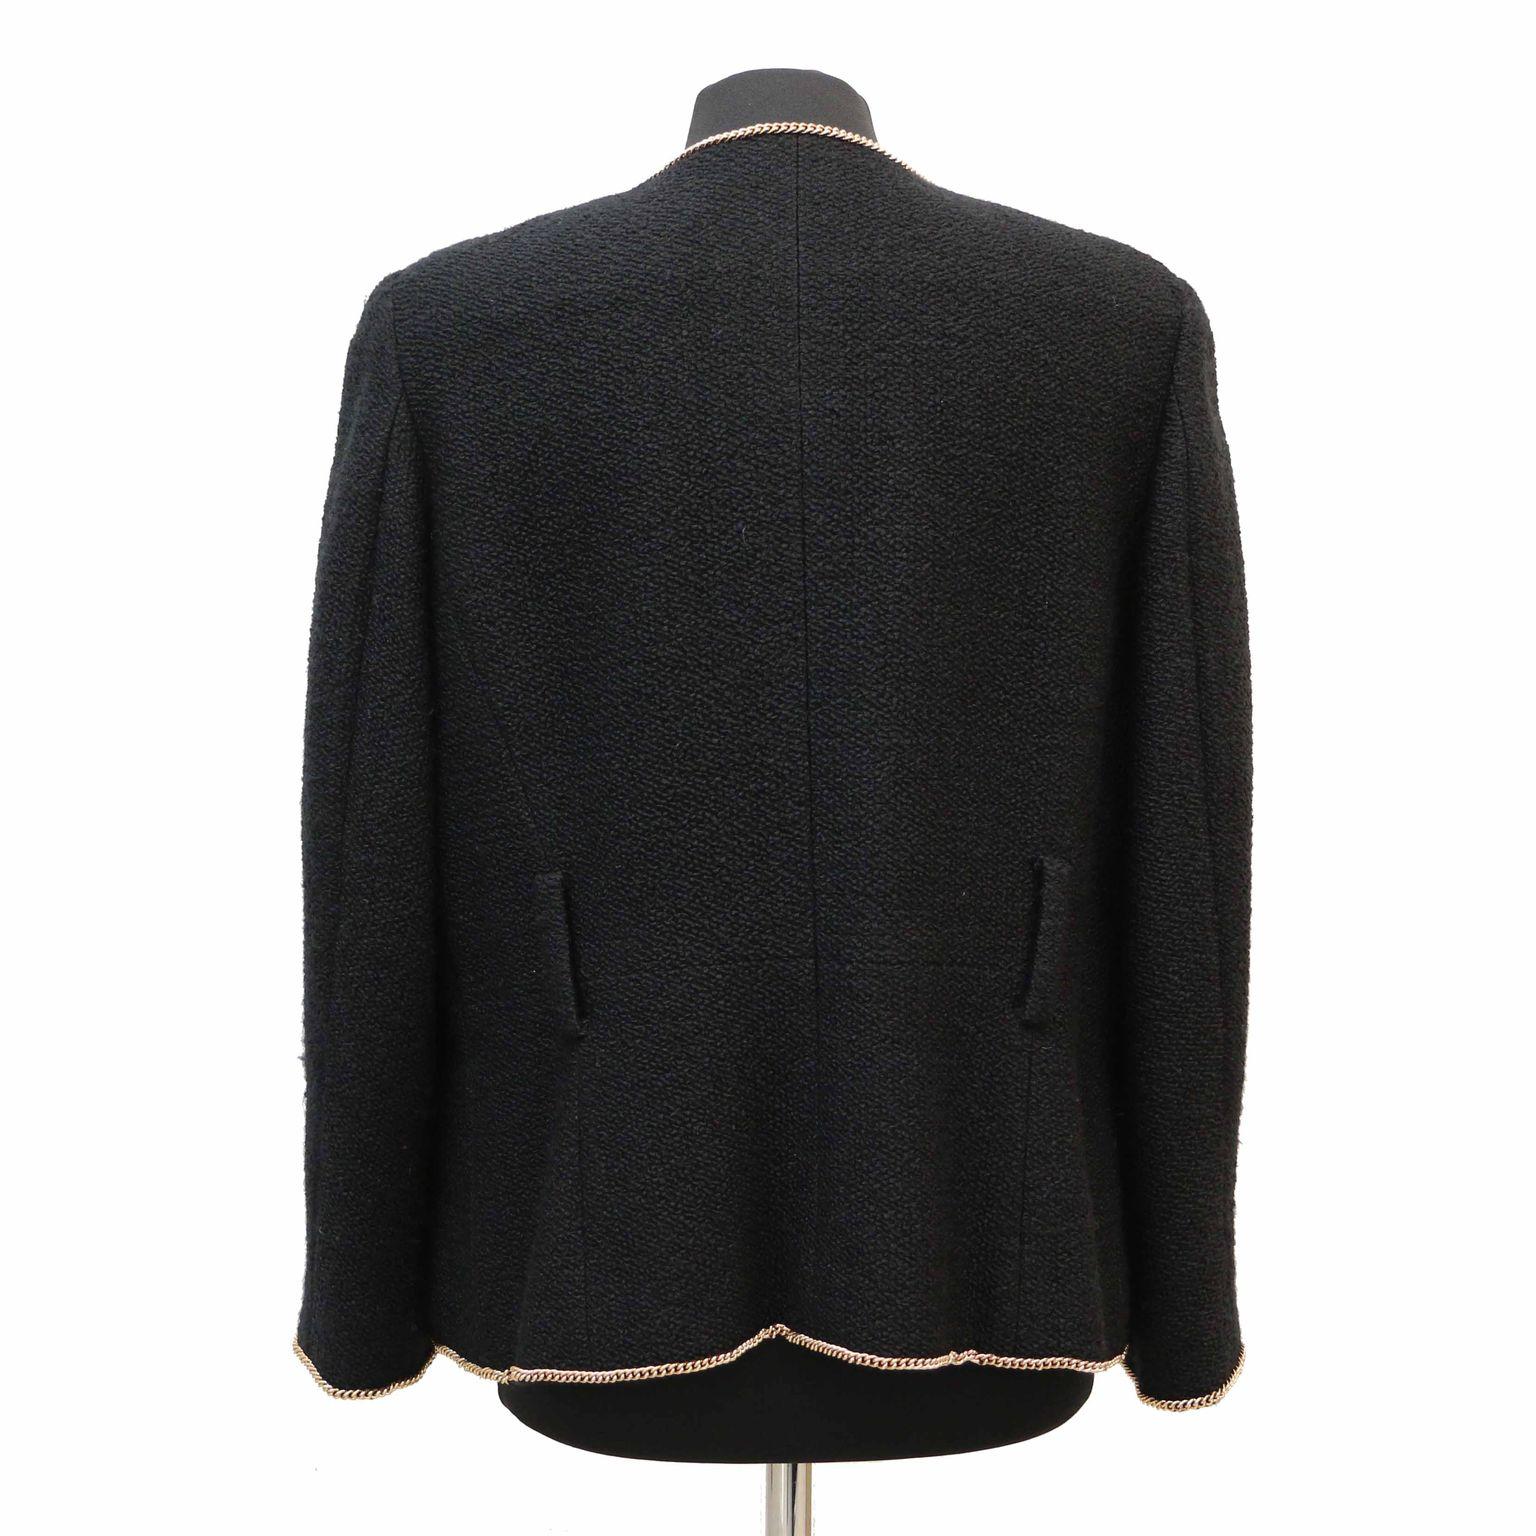 Black Chanel Jacket with gold jewelry in very good condition. Made in France, size 46FR.
Fabric : Wool, alpaca
Lining : 100% silk
Dimensions : Shoulders : 46cm, under the chest : 58cm, height : 60cm, sleeves length : 58cm, wrists circumference :